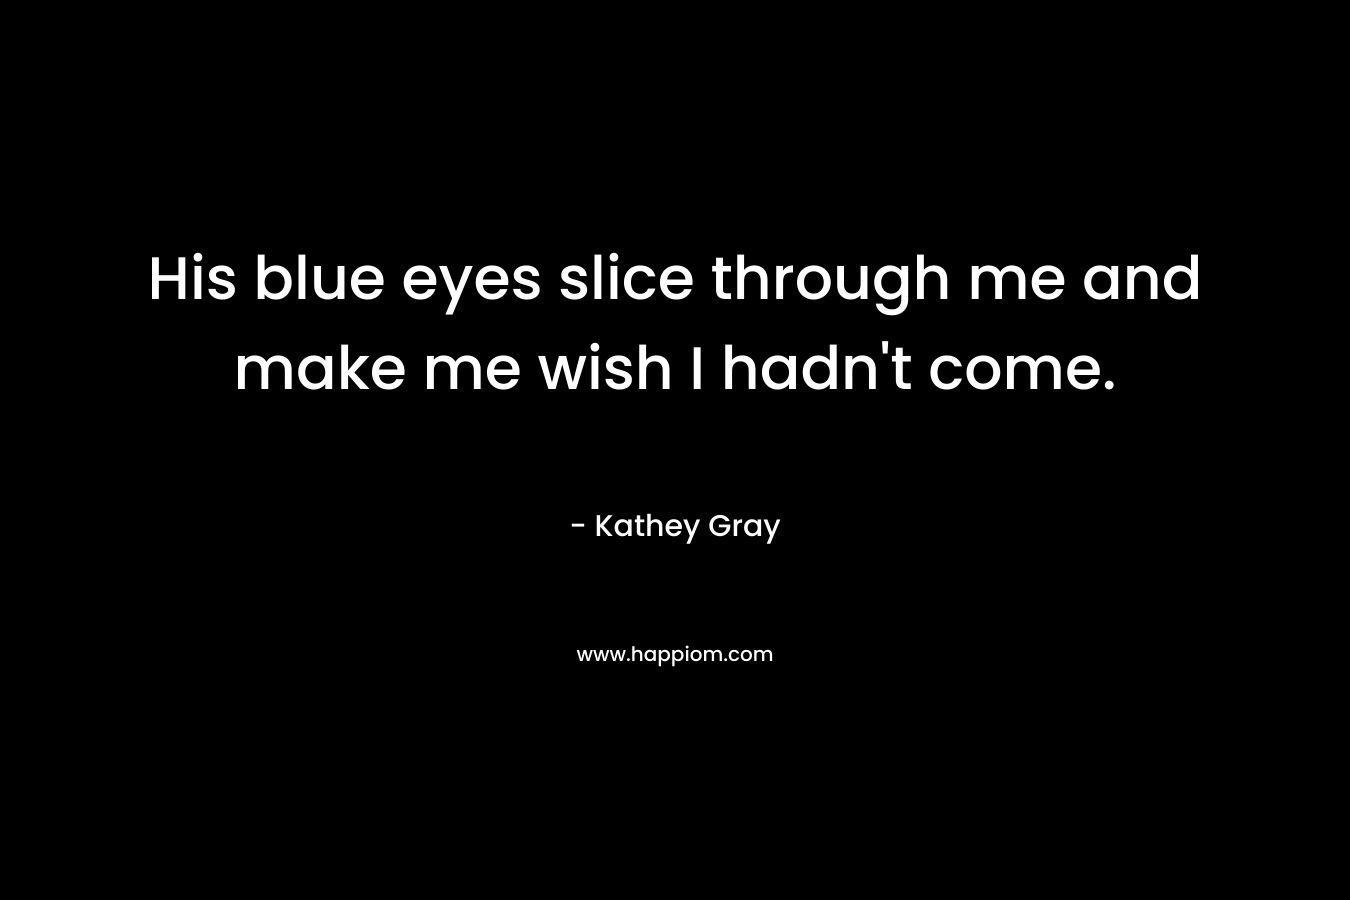 His blue eyes slice through me and make me wish I hadn’t come. – Kathey Gray